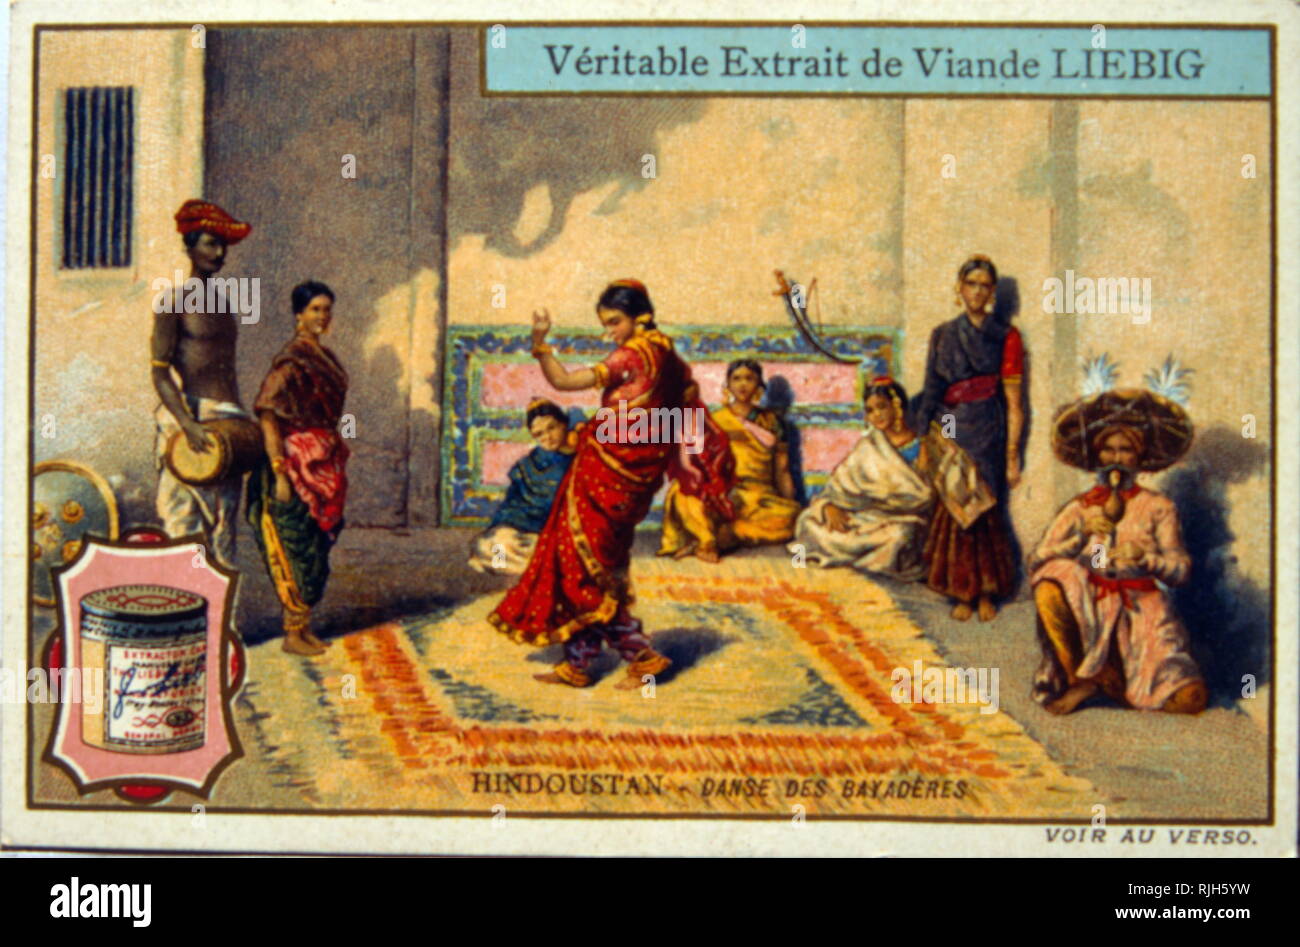 Liebig card showing Indian dancers and traditional music. India 1900 Stock Photo